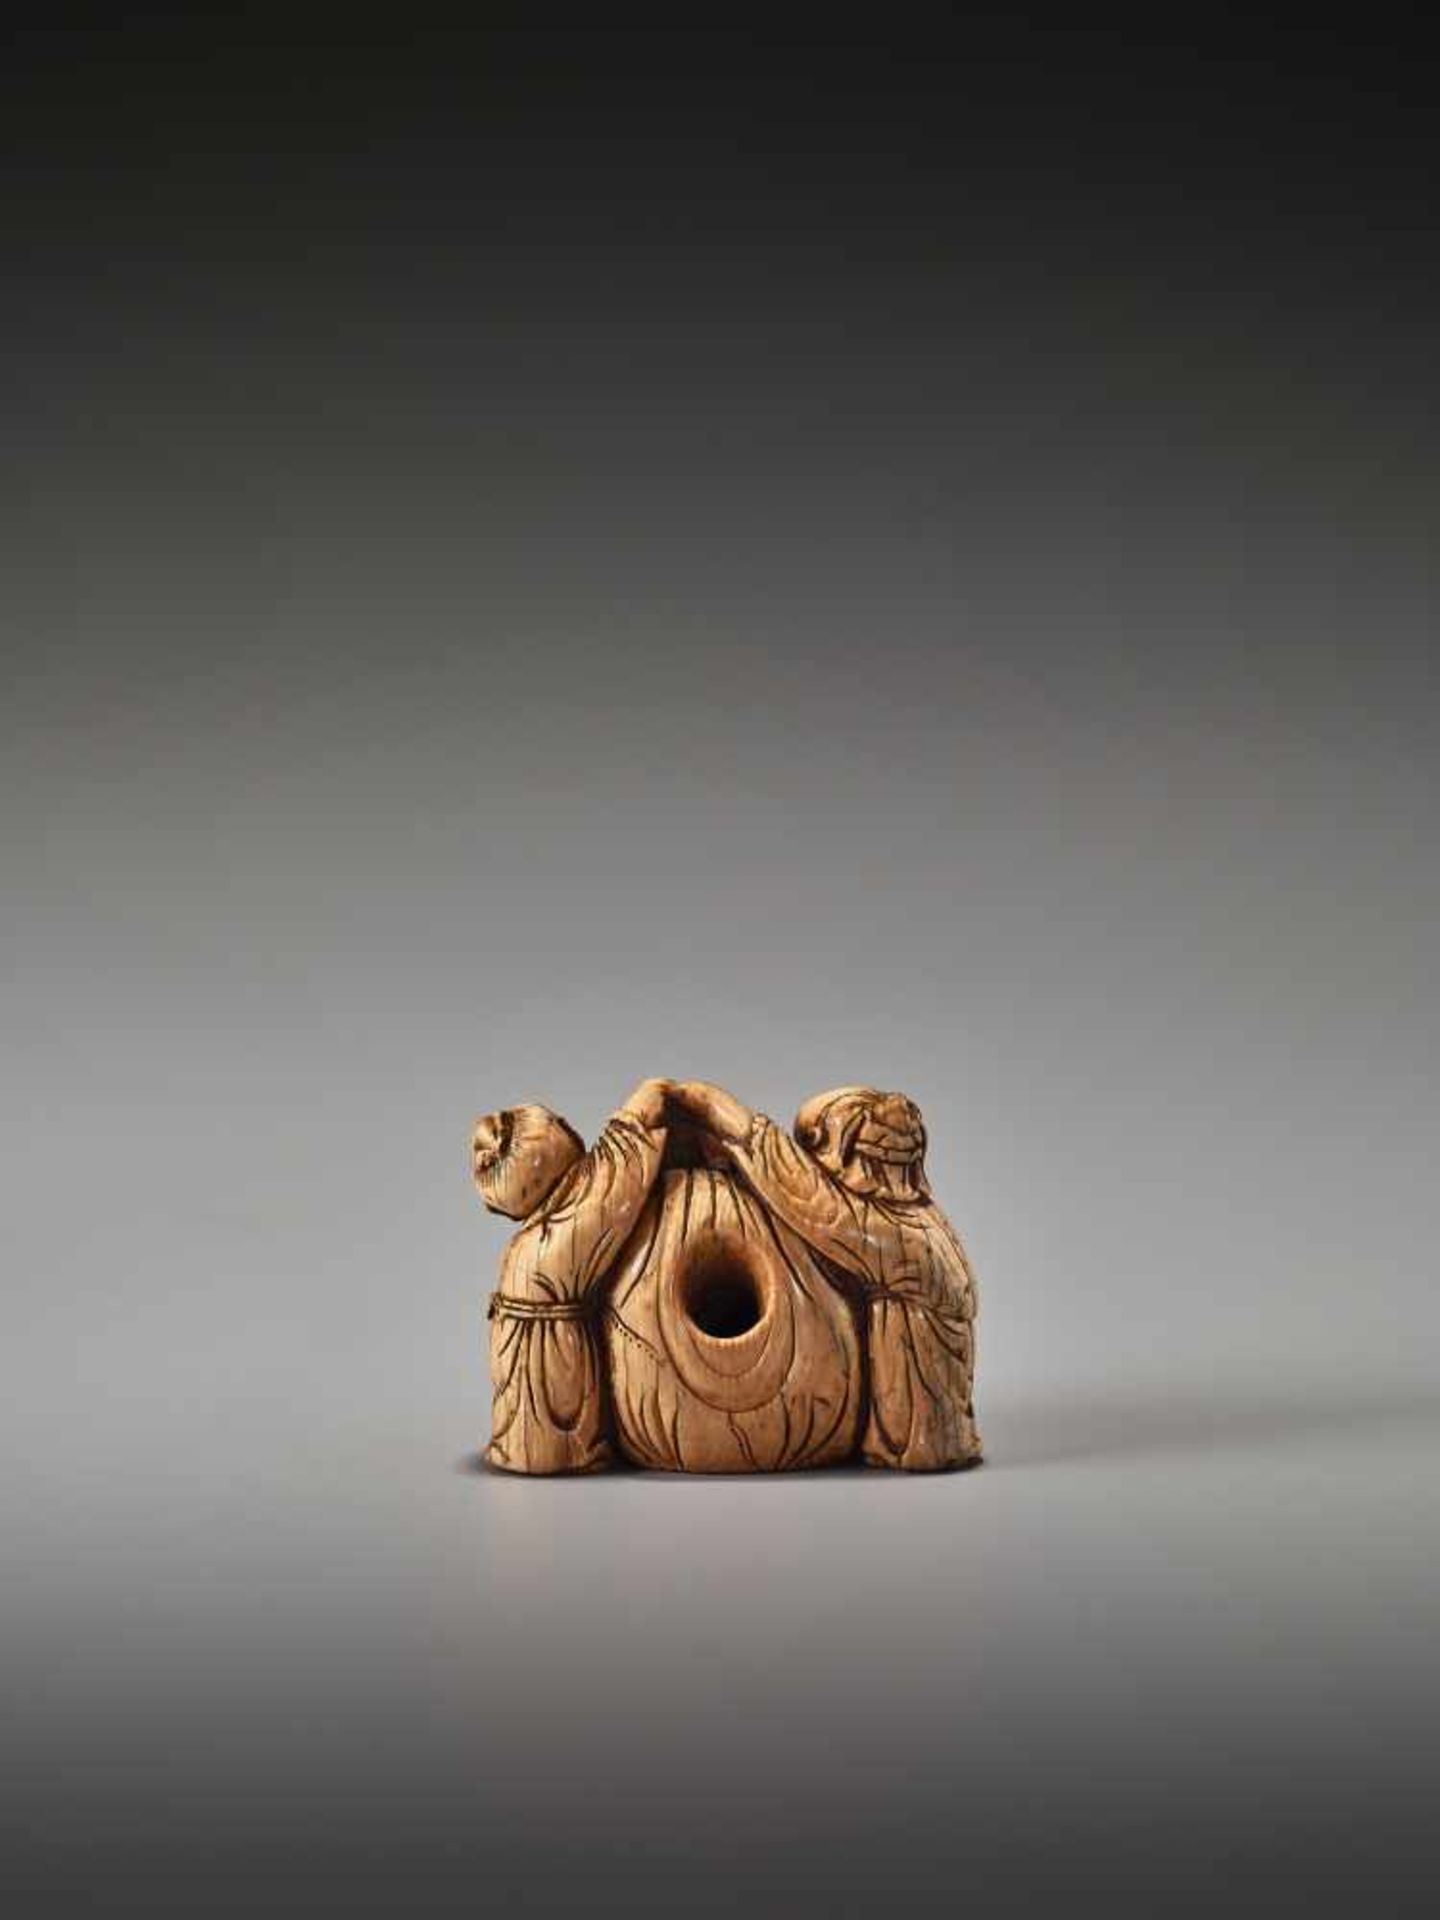 A VERY RARE 17TH CENTURY IVORY NETSUKE OF TWO CHINESE BOYS WITH HOTEI’S SACKUnsigned, ivory - Image 4 of 6